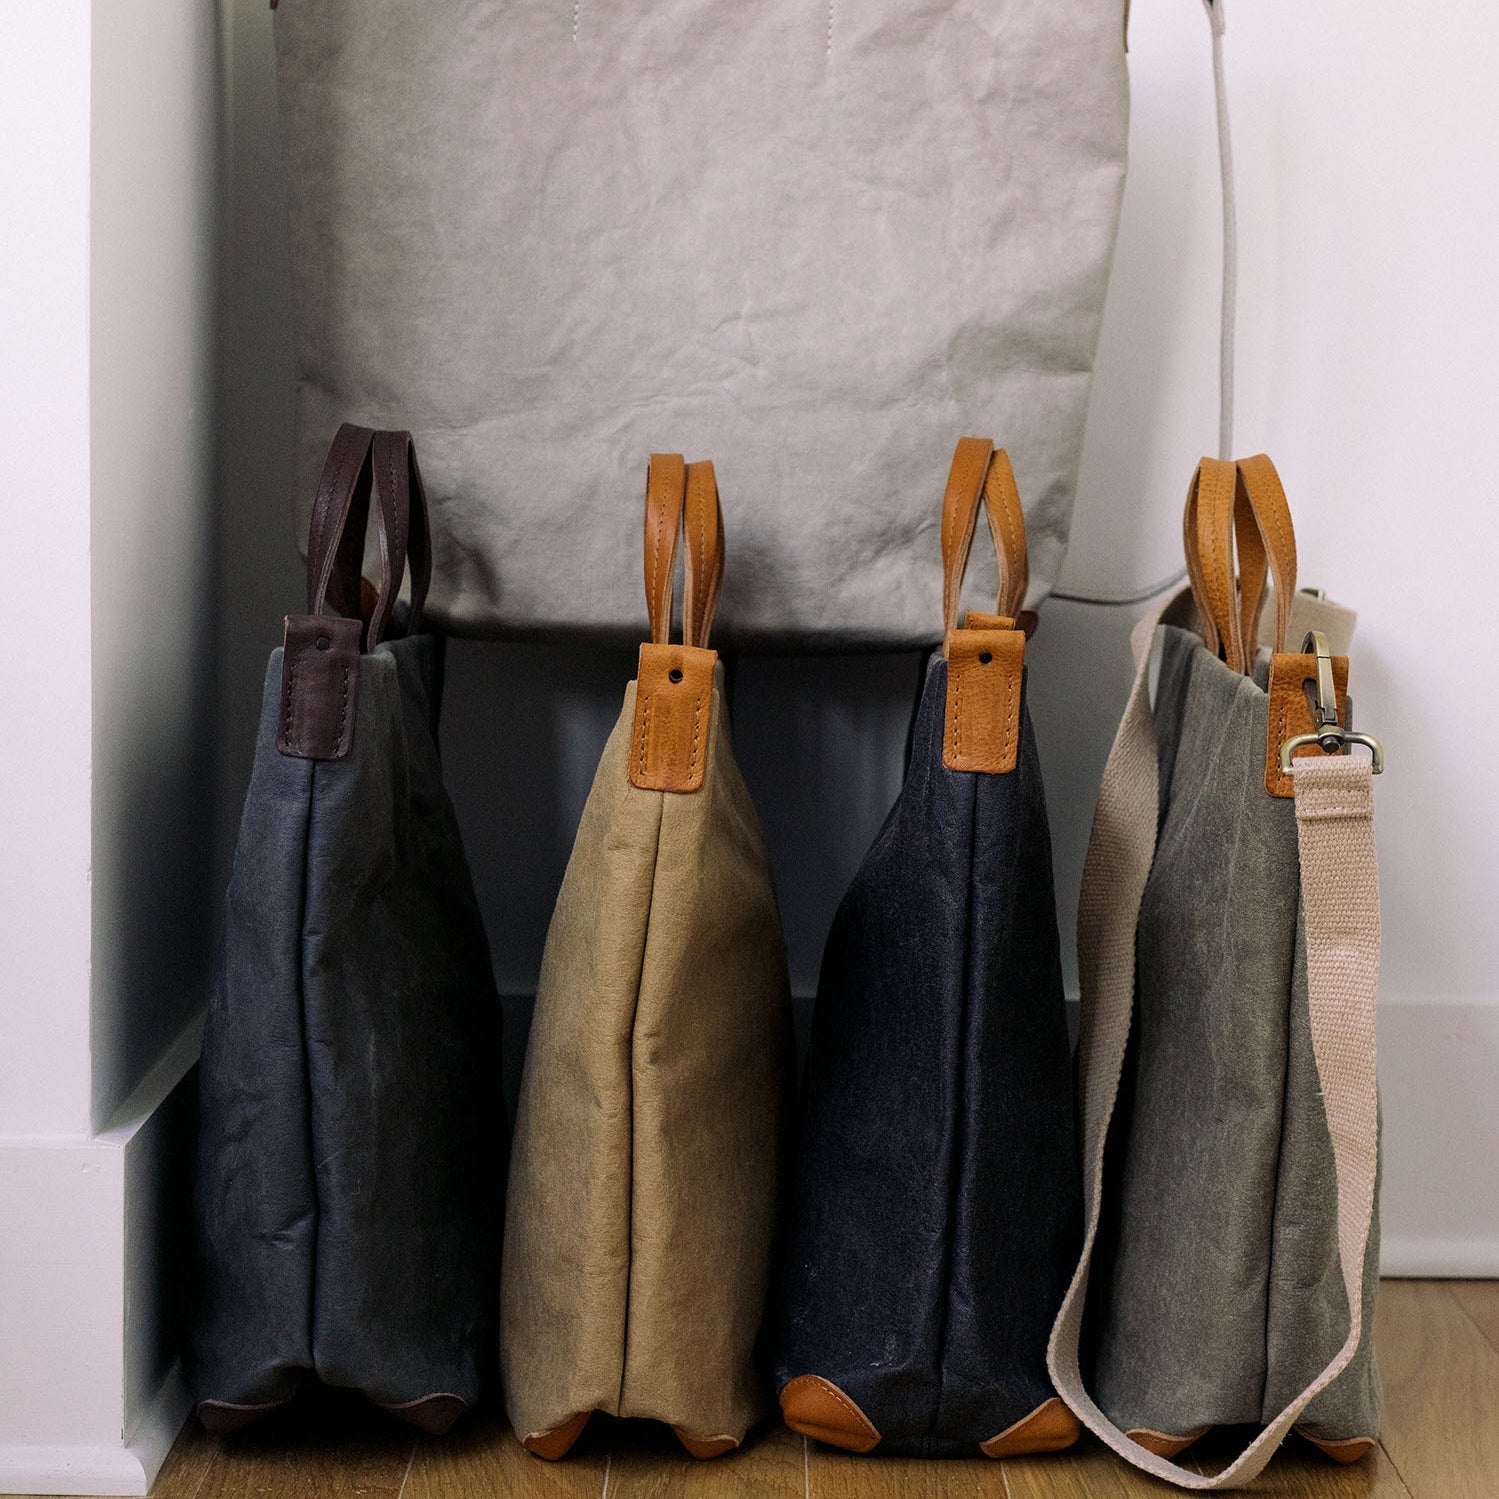 Four washable paper tote bags are shown lined up in a row. The bags are shown from a side angle.